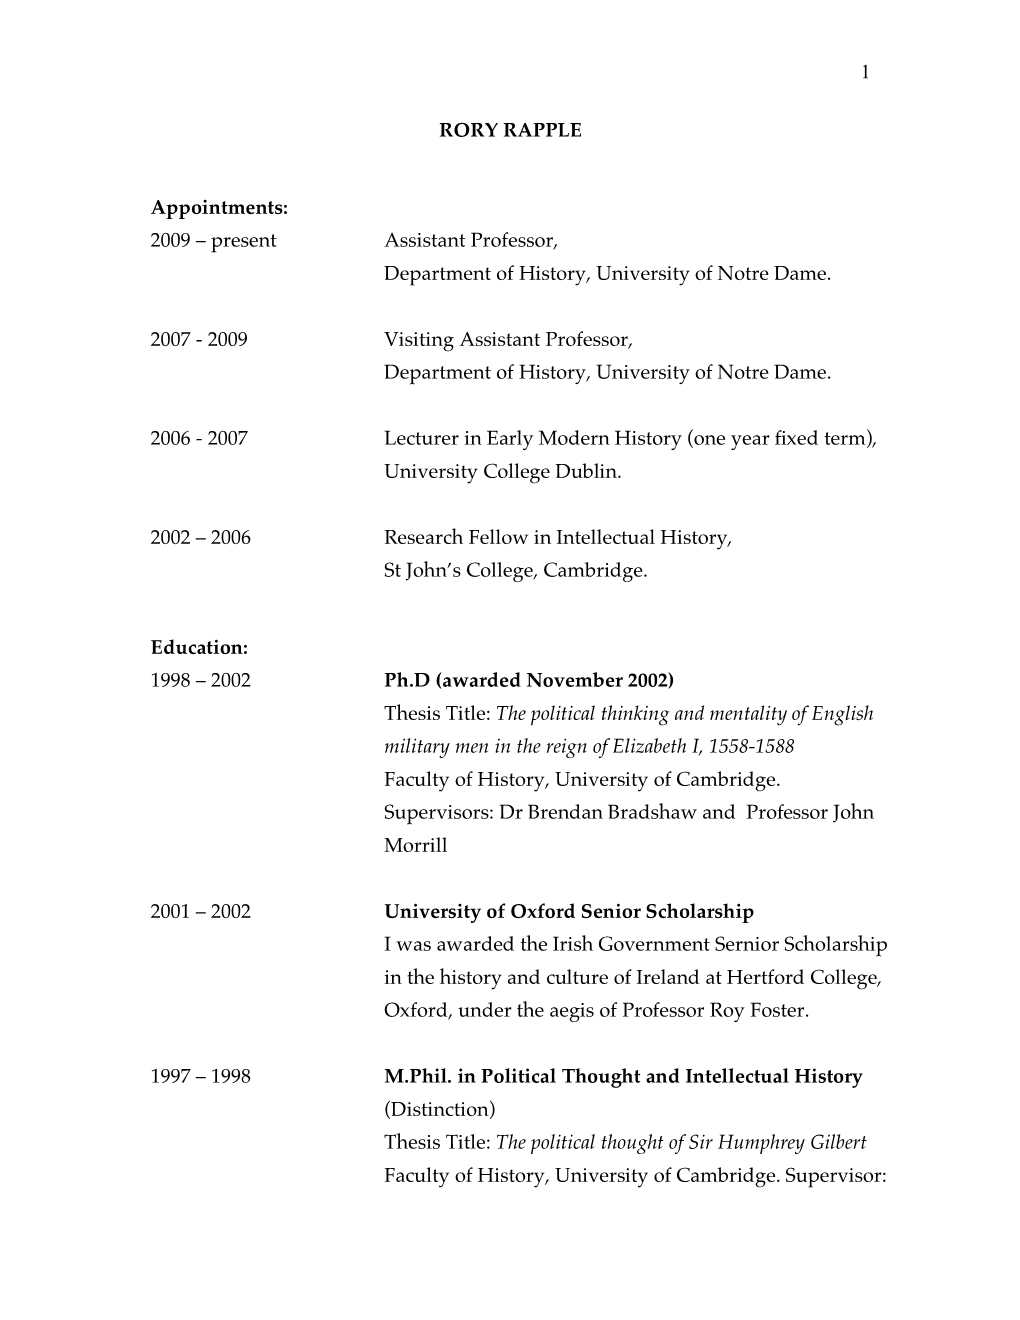 1 RORY RAPPLE Appointments: 2009 – Present Assistant Professor, Department of History, University of Notre Dame. 2007